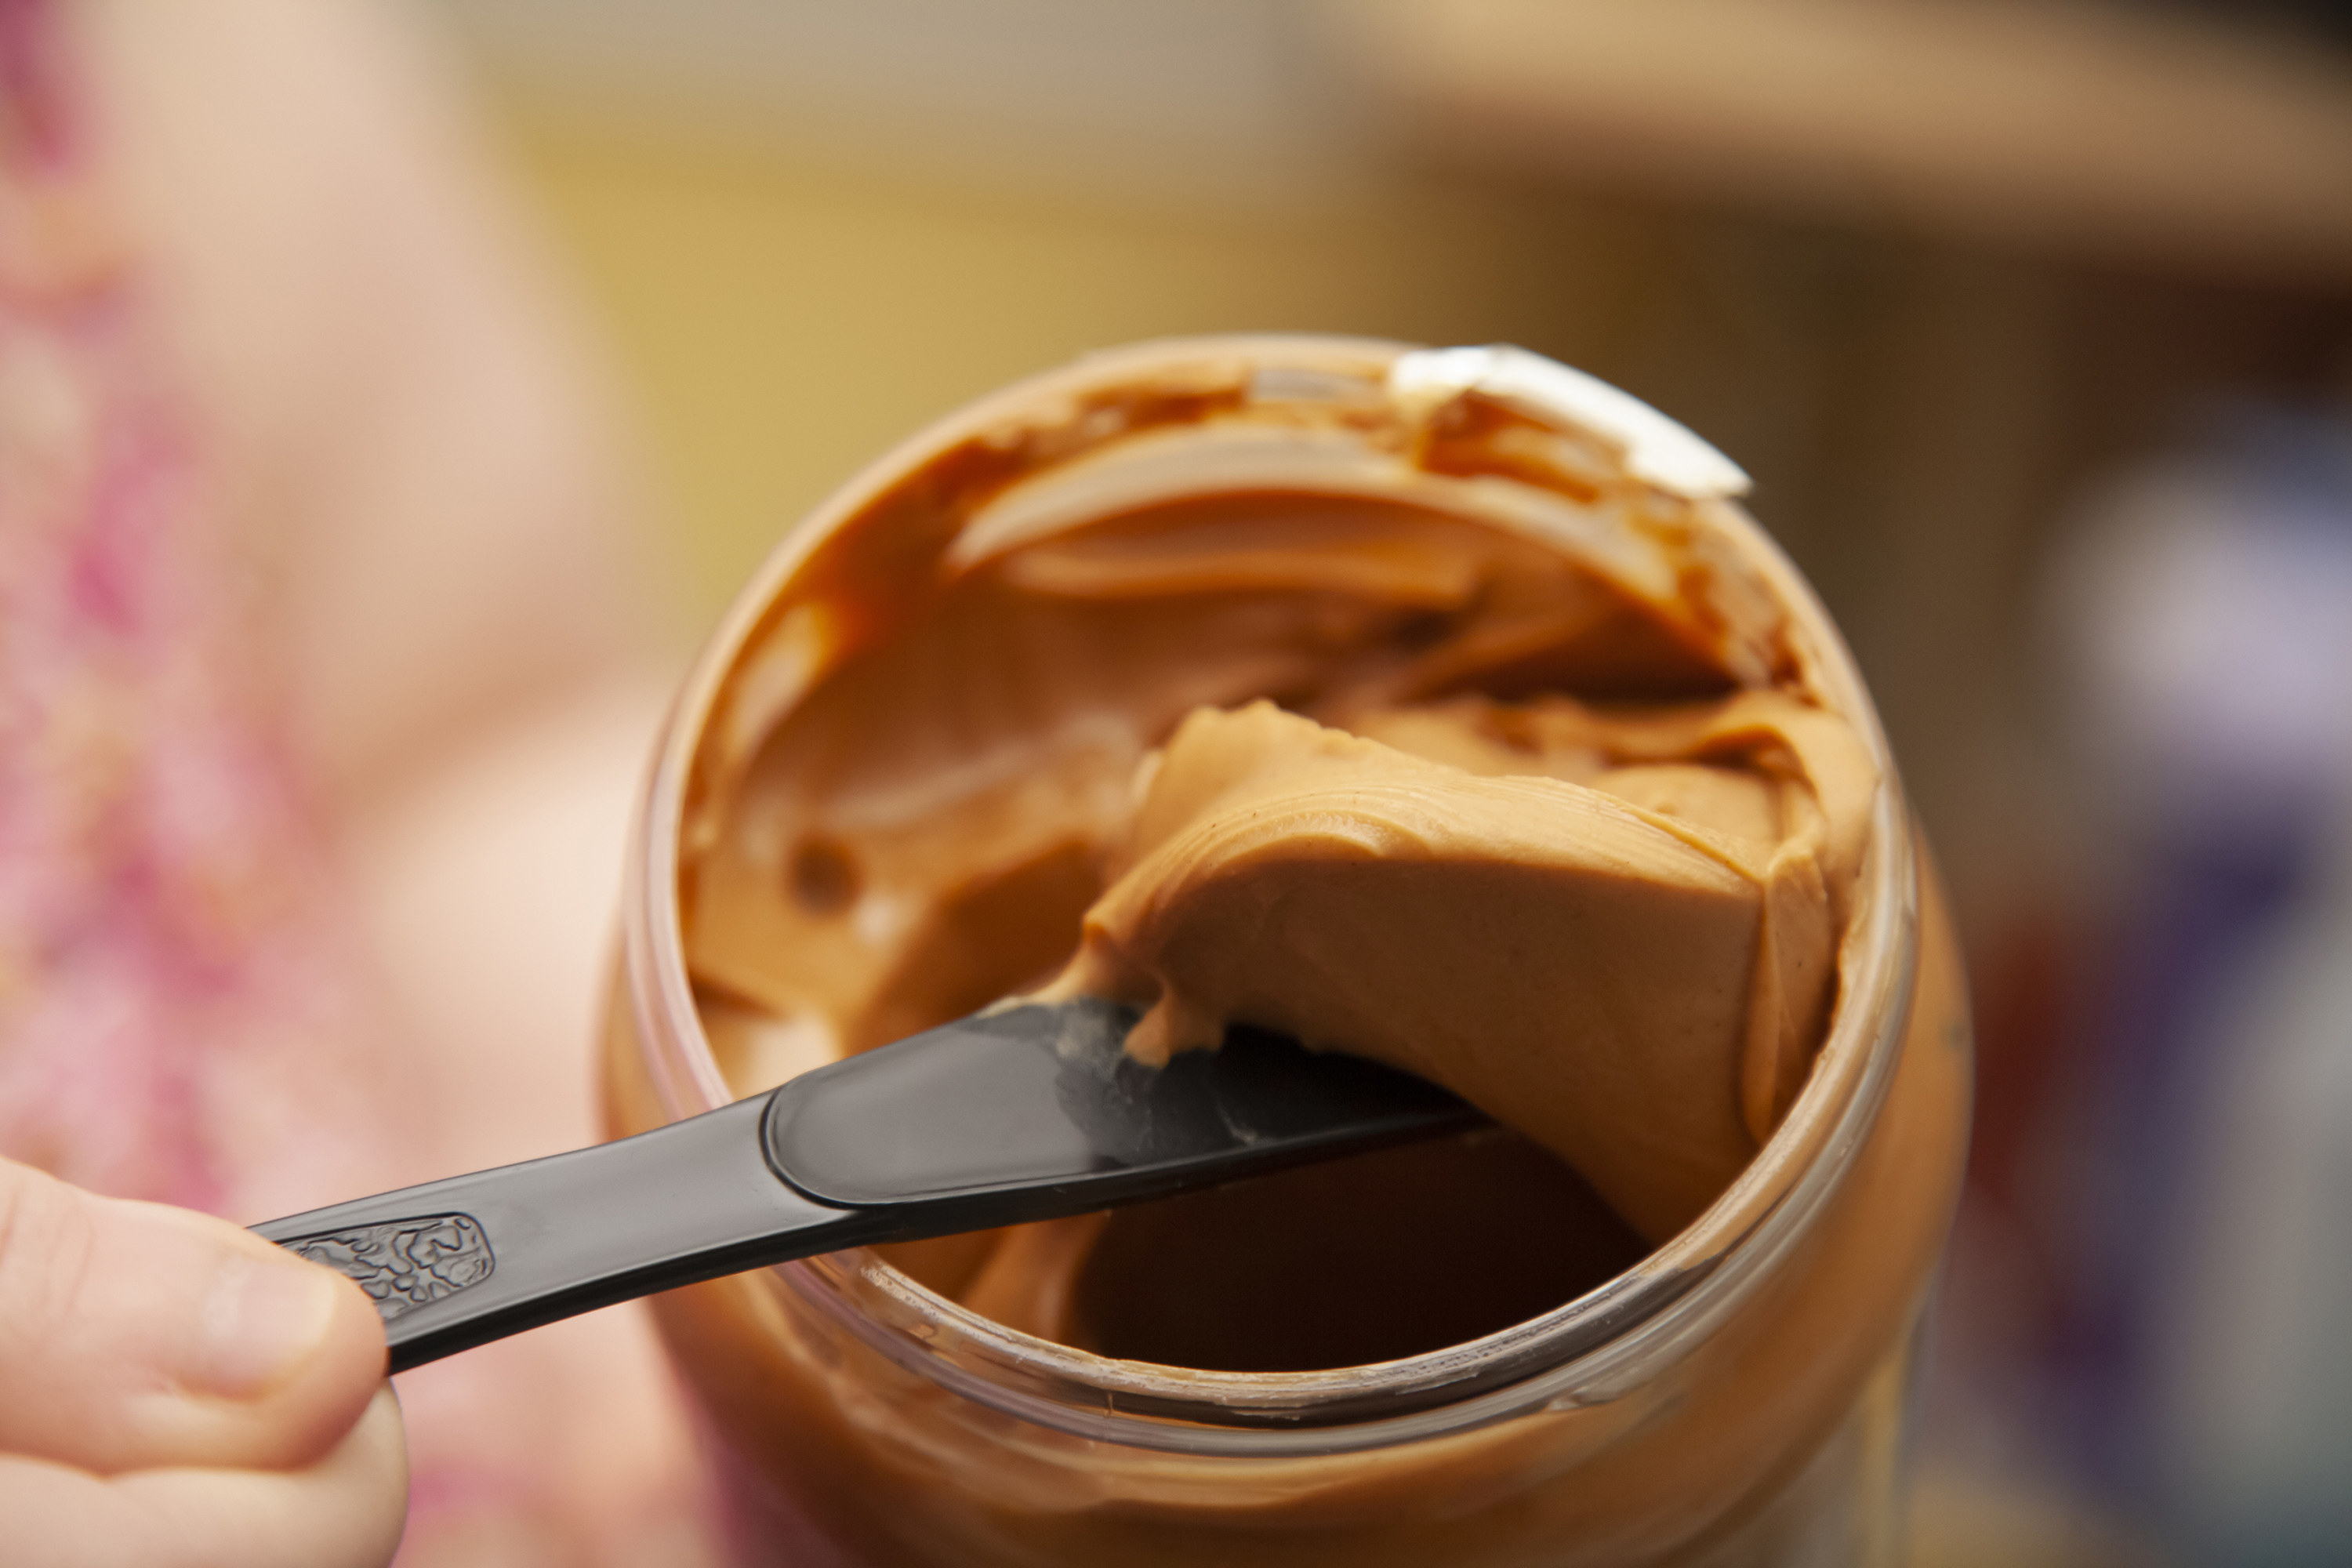 scooping peanut butter out of a jar with a knife